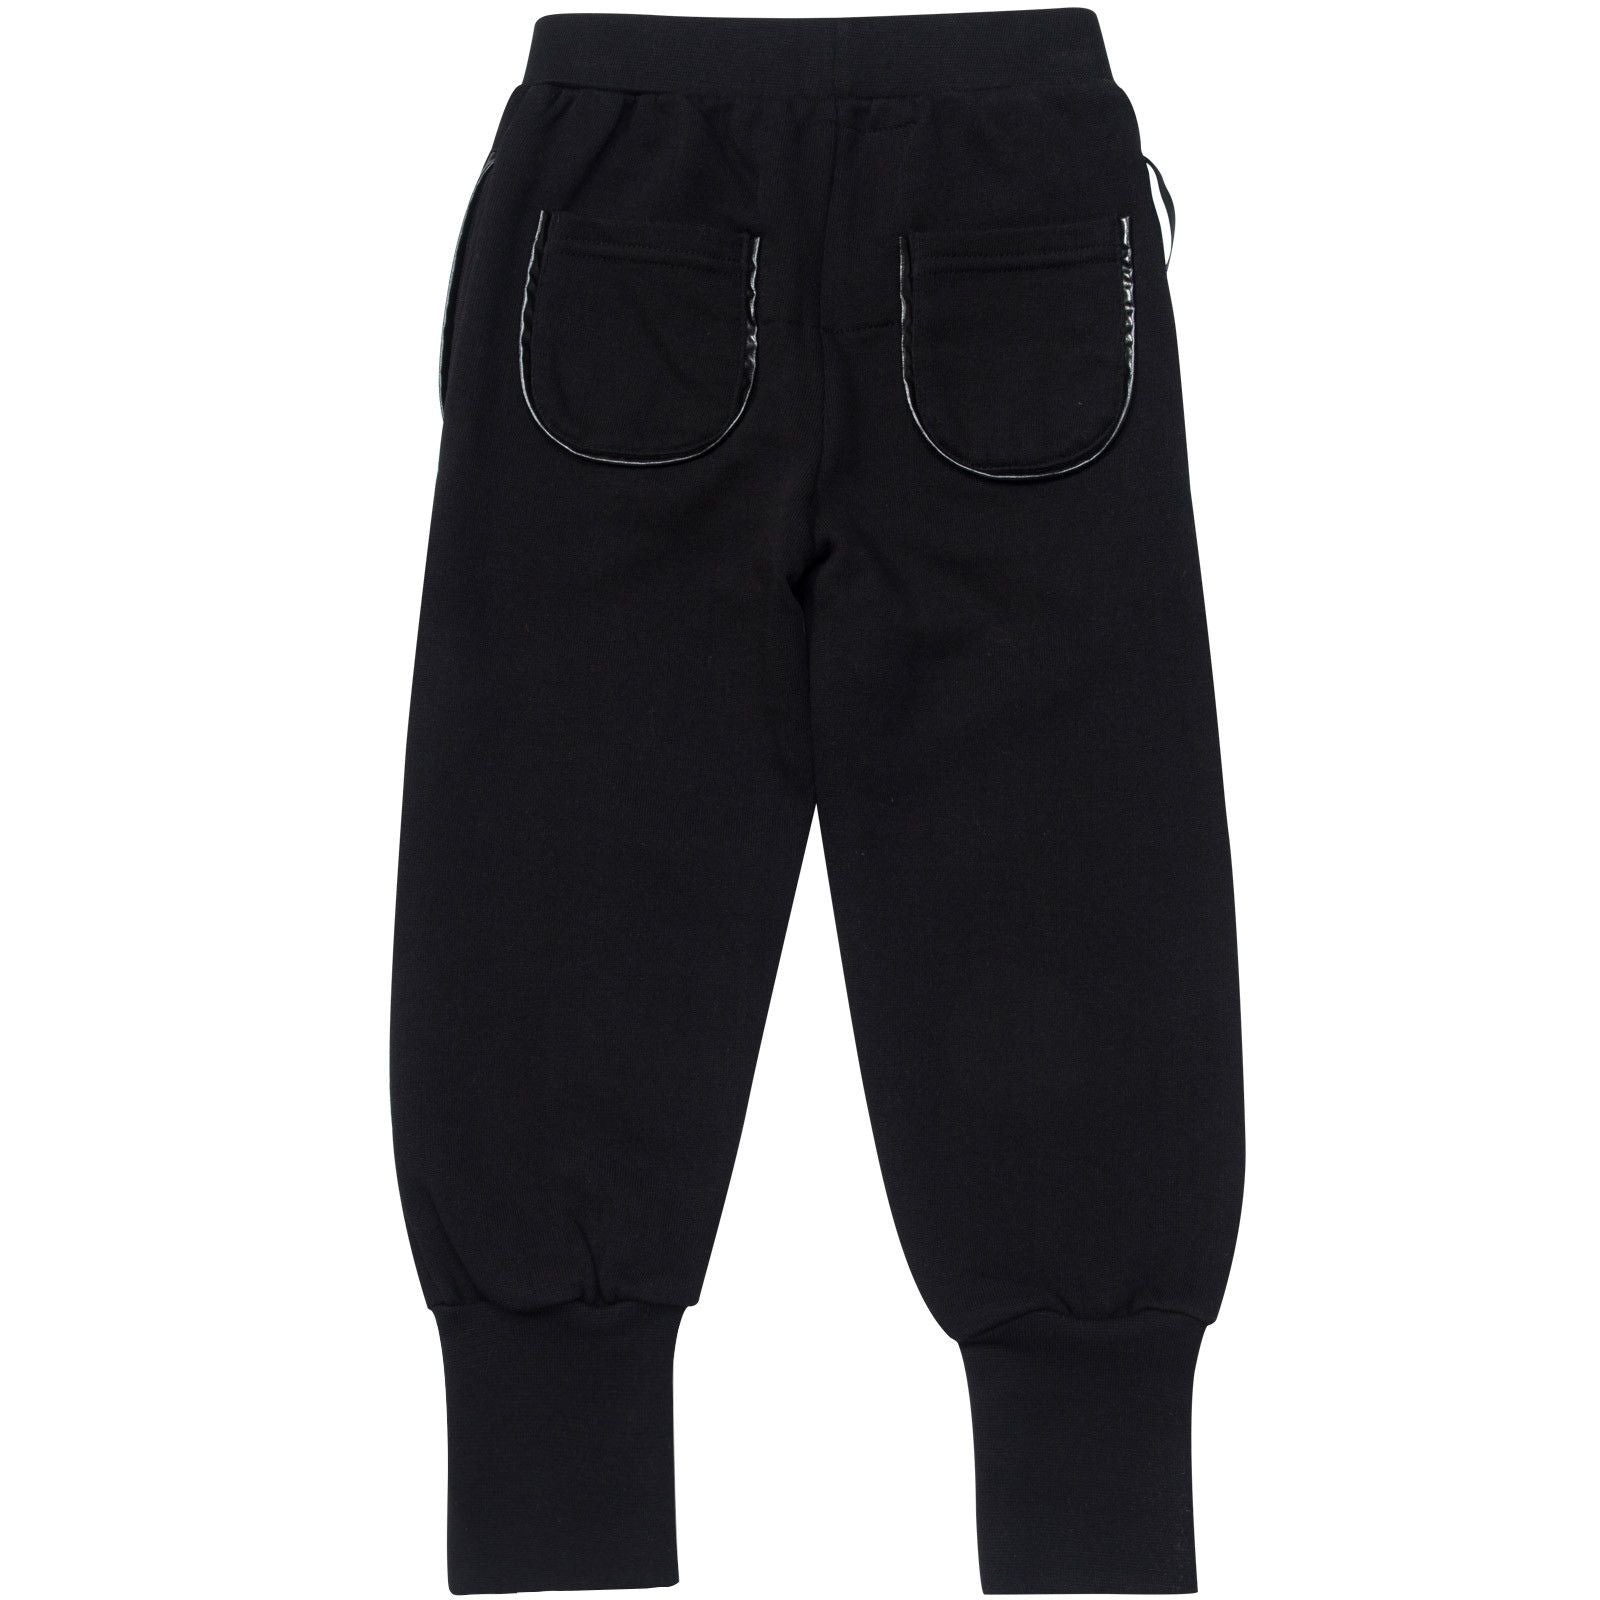 Boys&Girls Black Tight Cuffs Trouses With Black Printed Trims On Legs - CÉMAROSE | Children's Fashion Store - 2